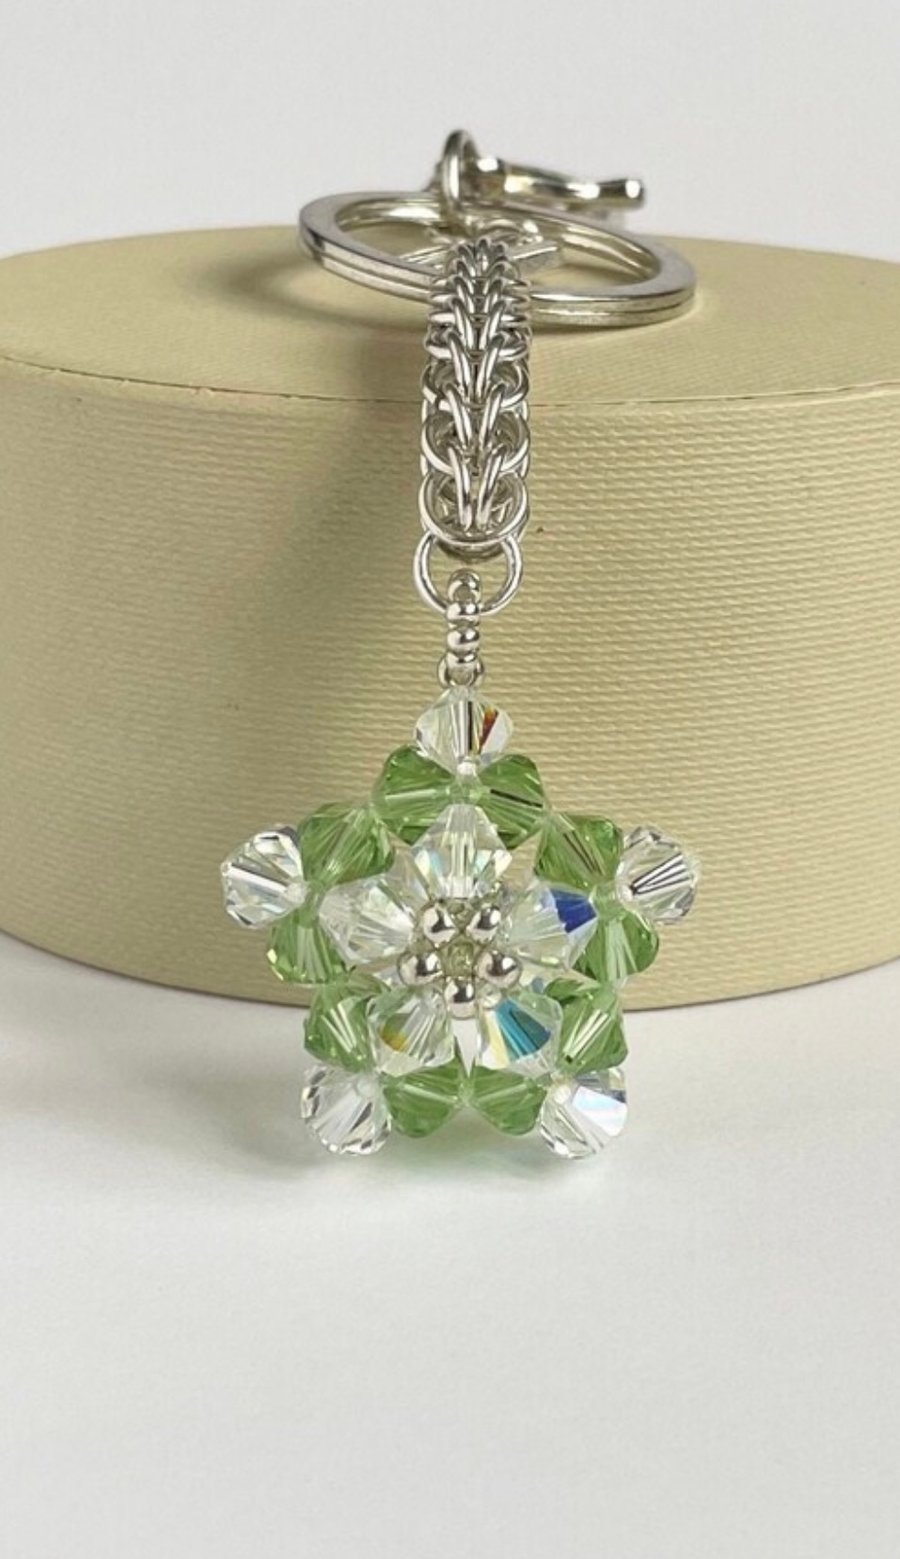 Handbag Charm, Green Crystal Star, with a Chainmaille Chain and Keyring